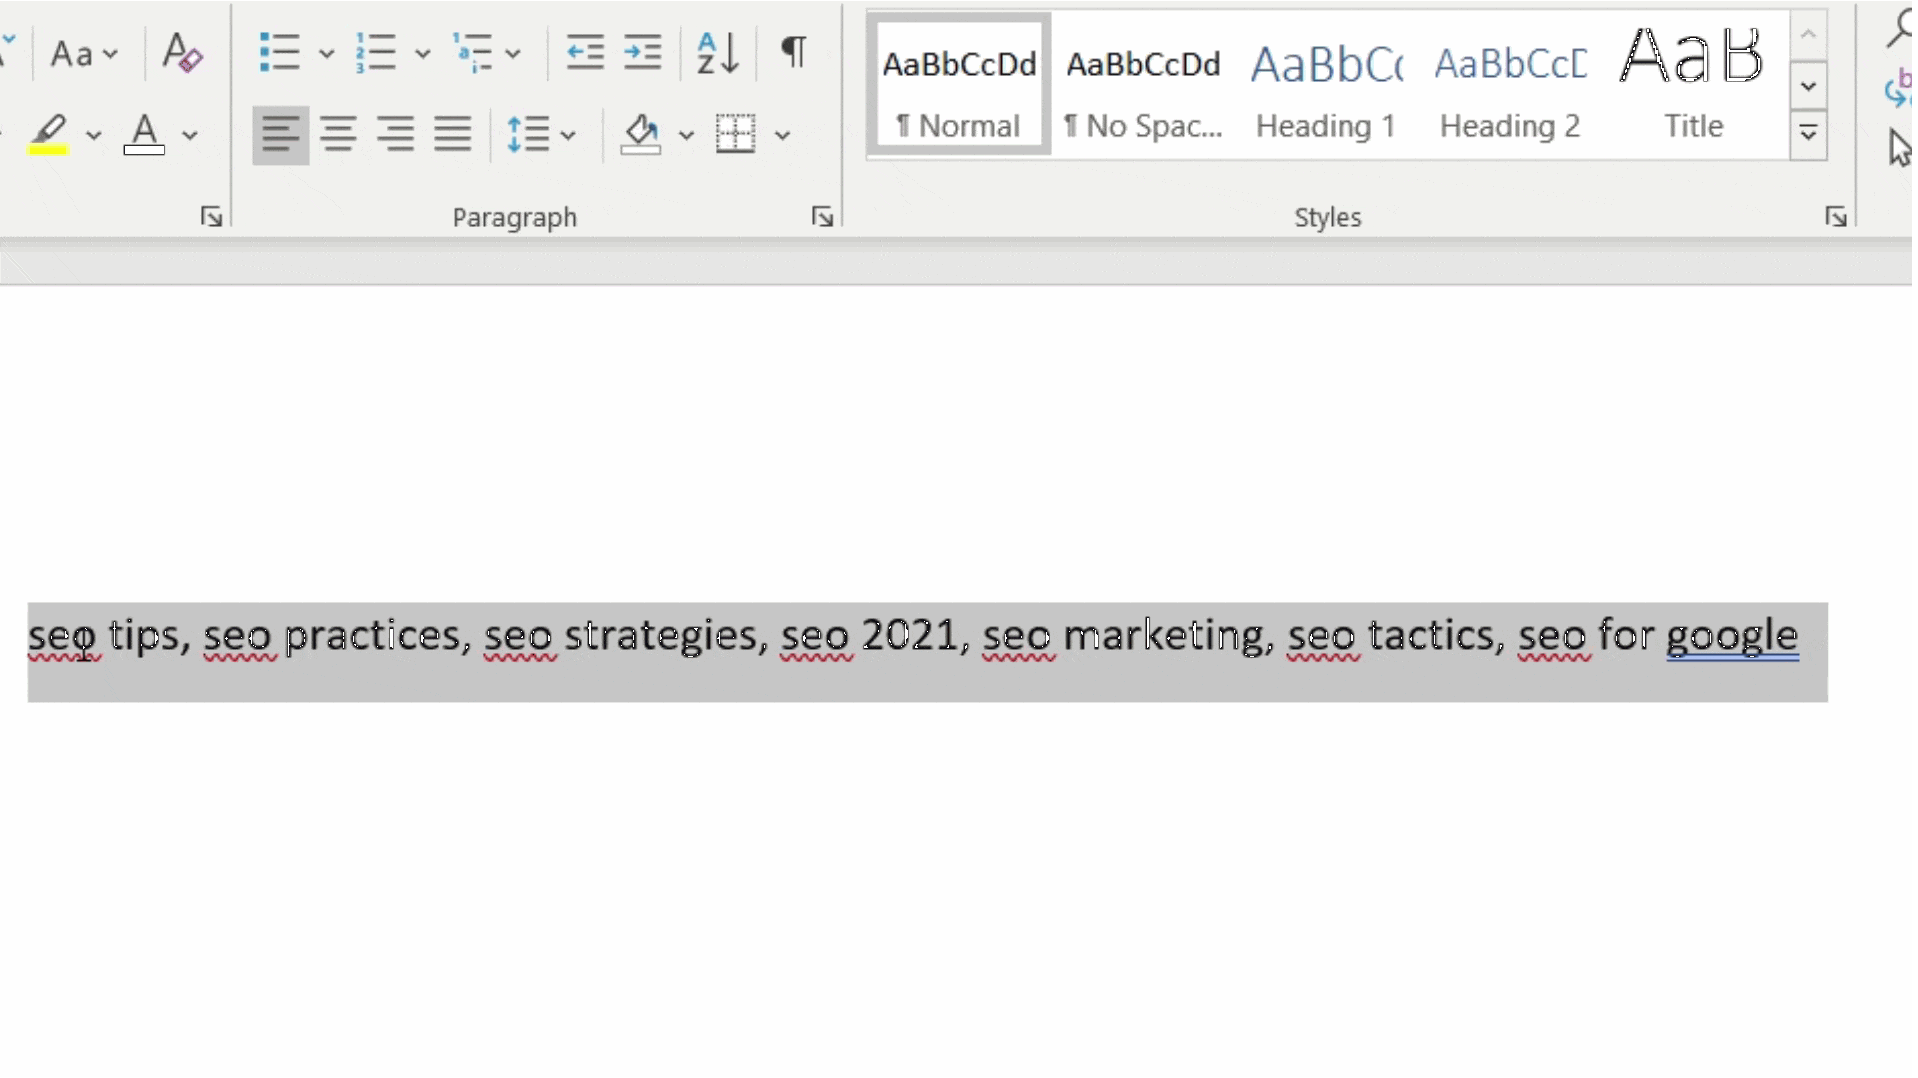 old seo strategy of stuffing keywords into the bottom of the page and covering it with same color as background